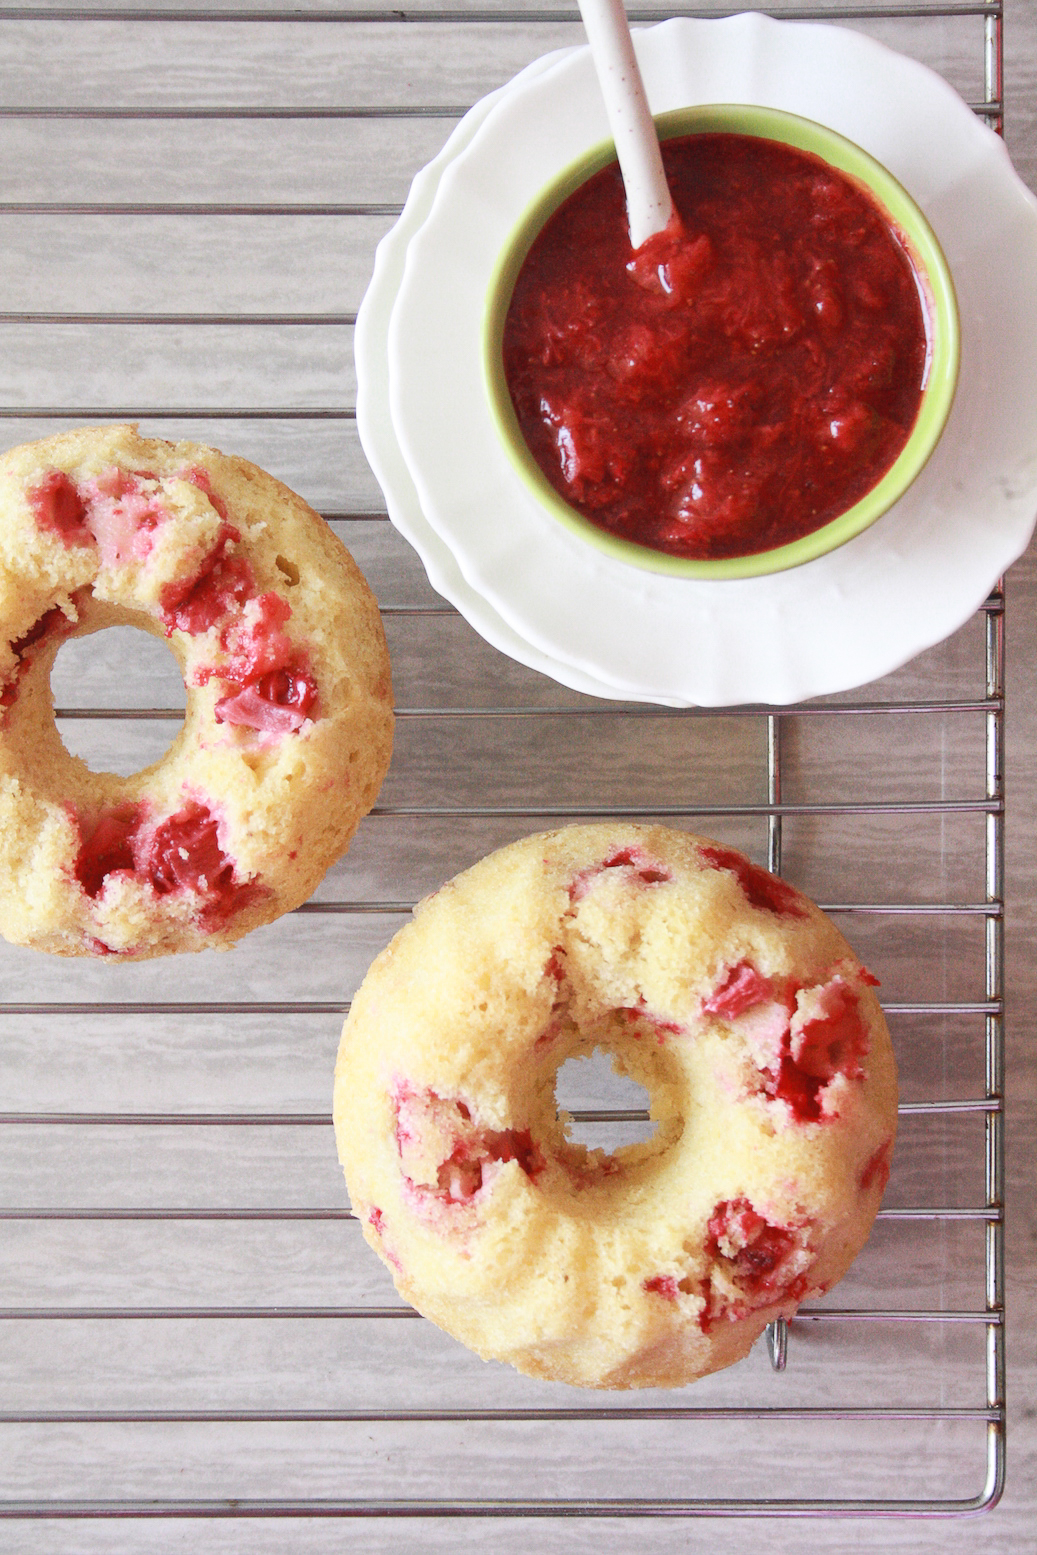 Soft, buttery bundt cakes filled with fresh strawberries and topped with a tangy, cinnamon-y compote!